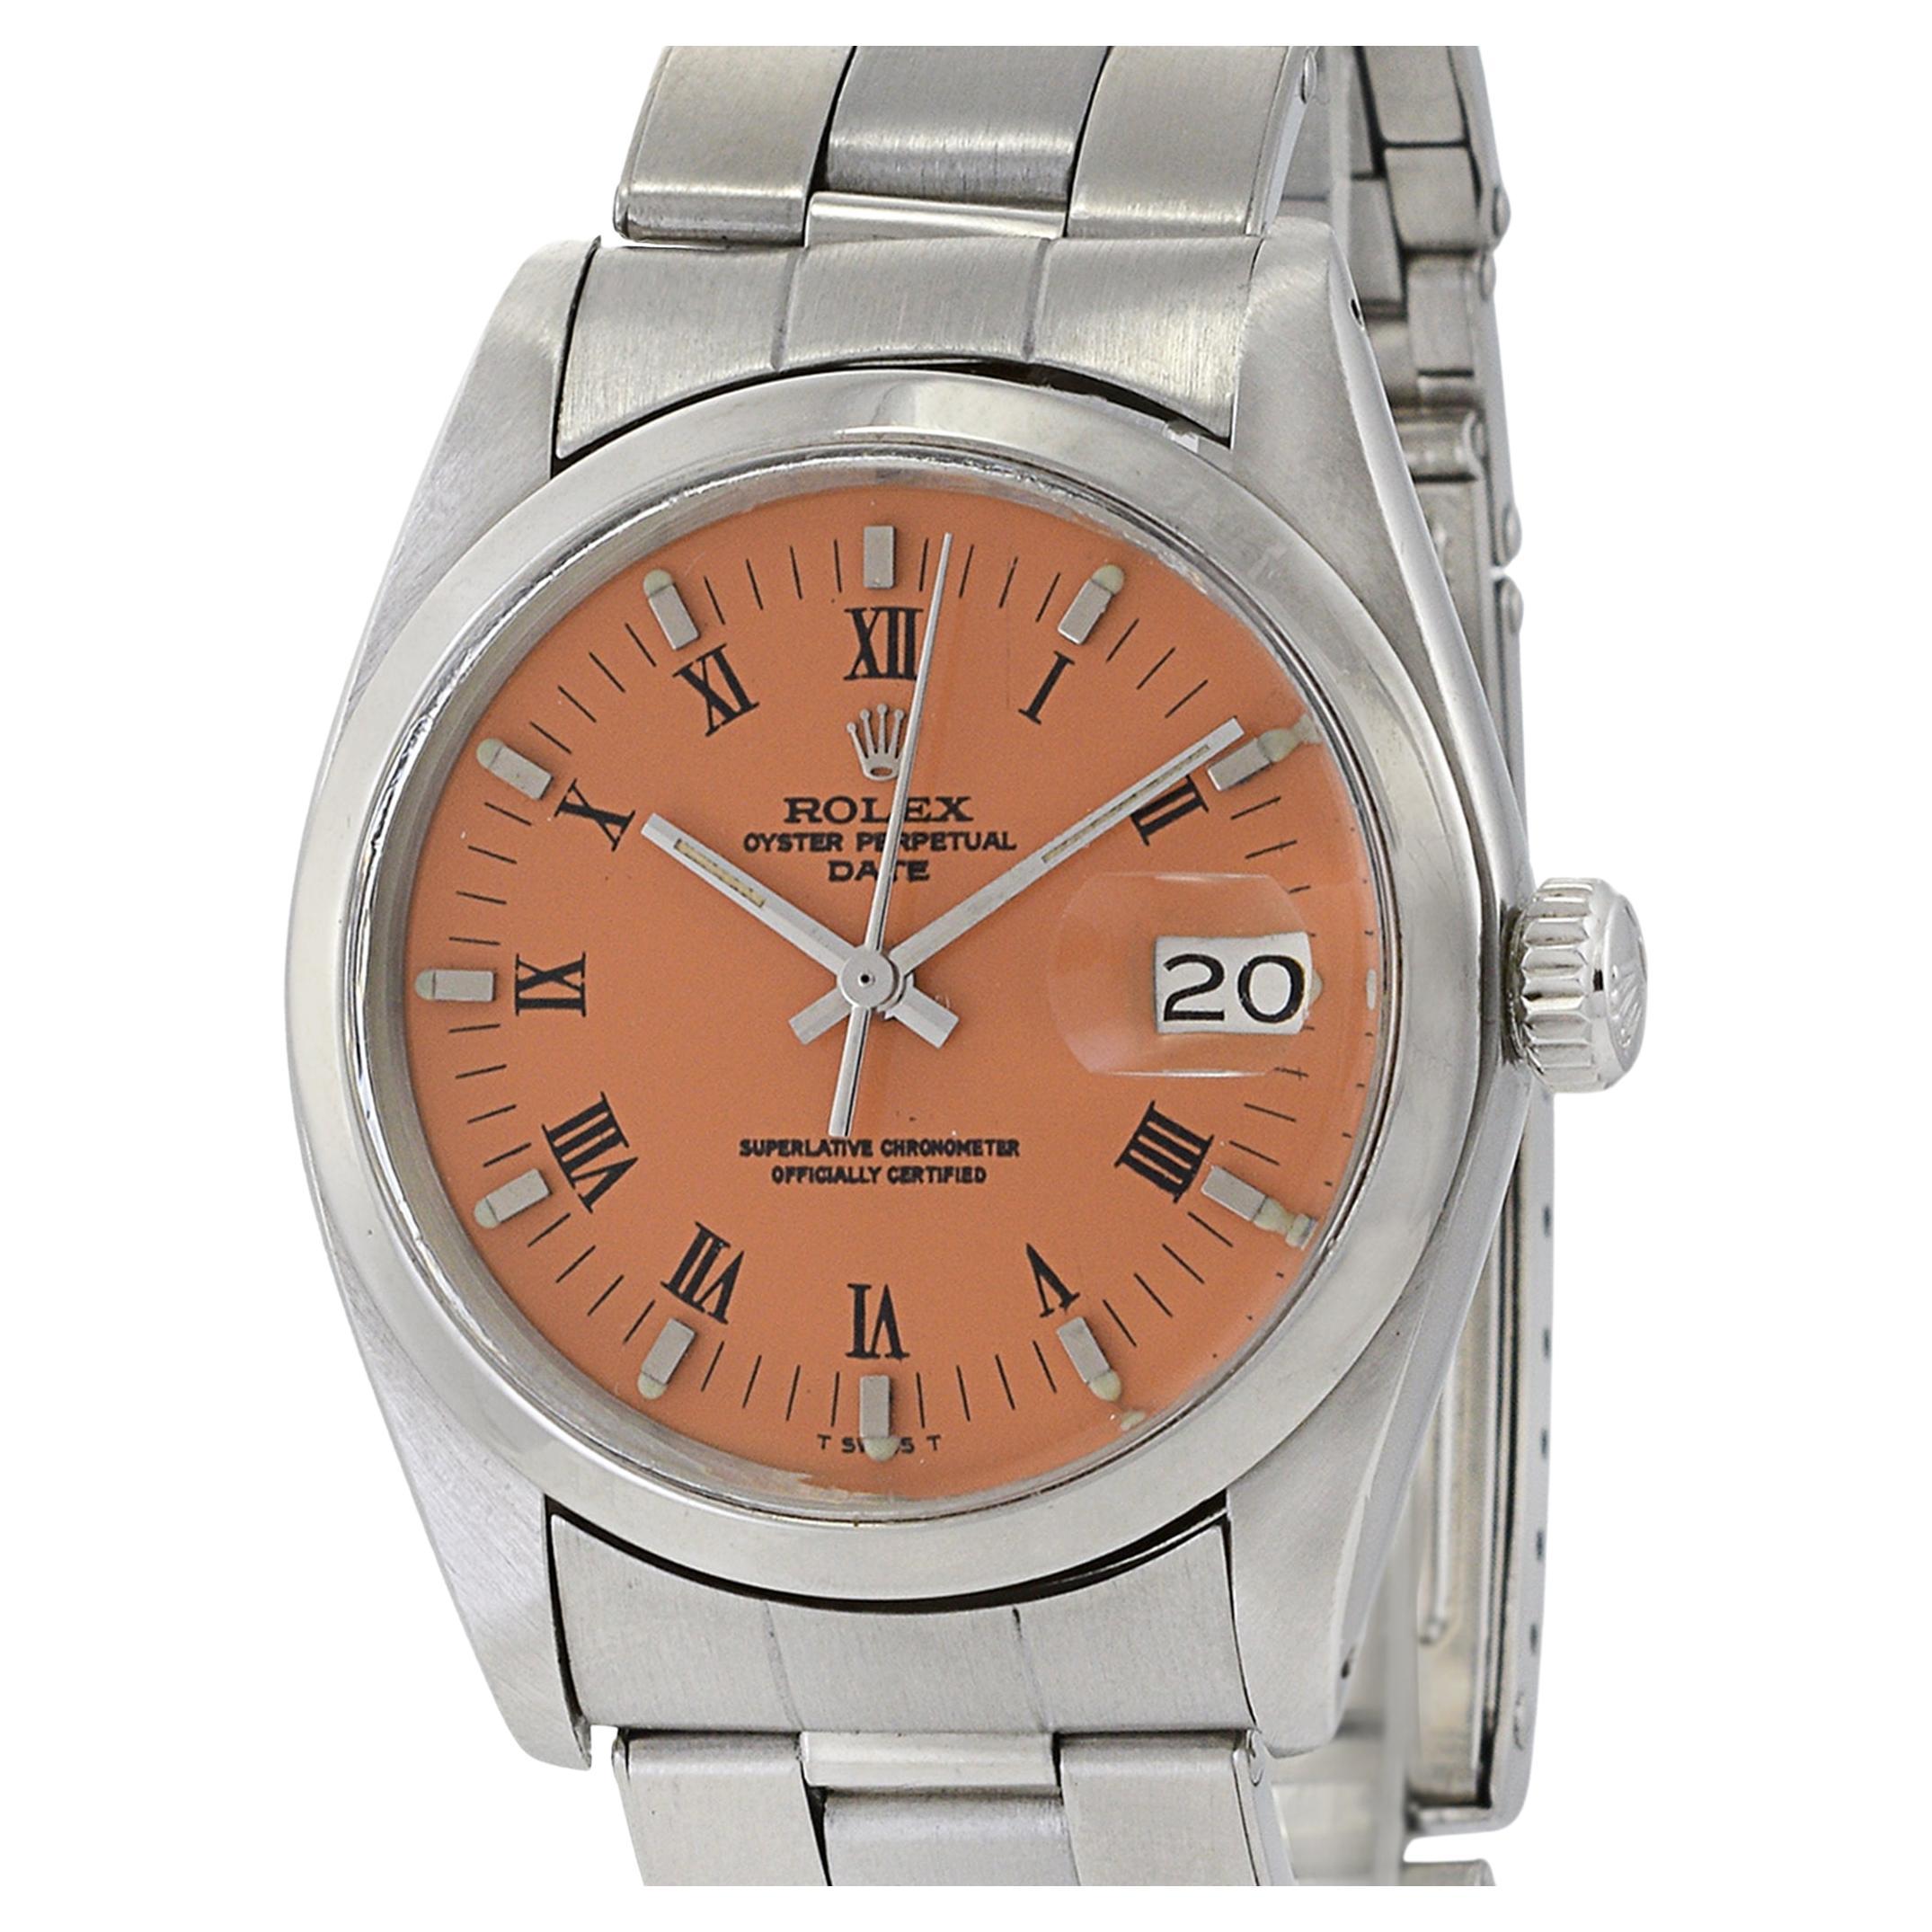 Rolex Oyster Perpetual Fecha Referencia 1500